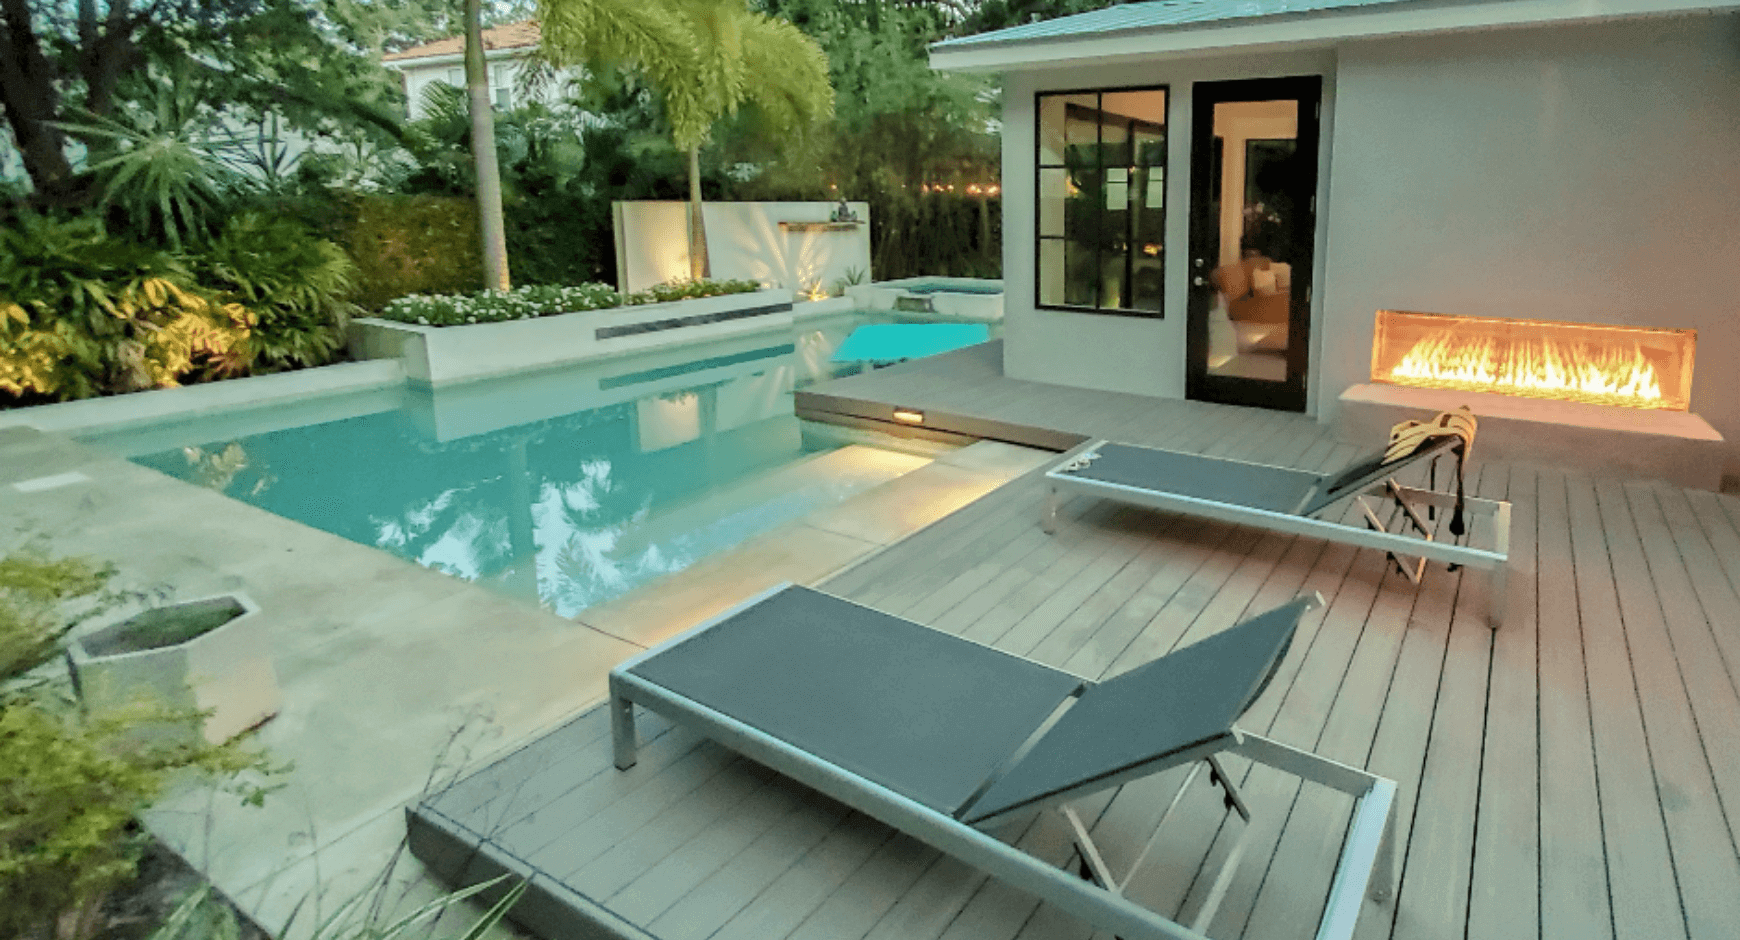 Pool Patio with Warmth